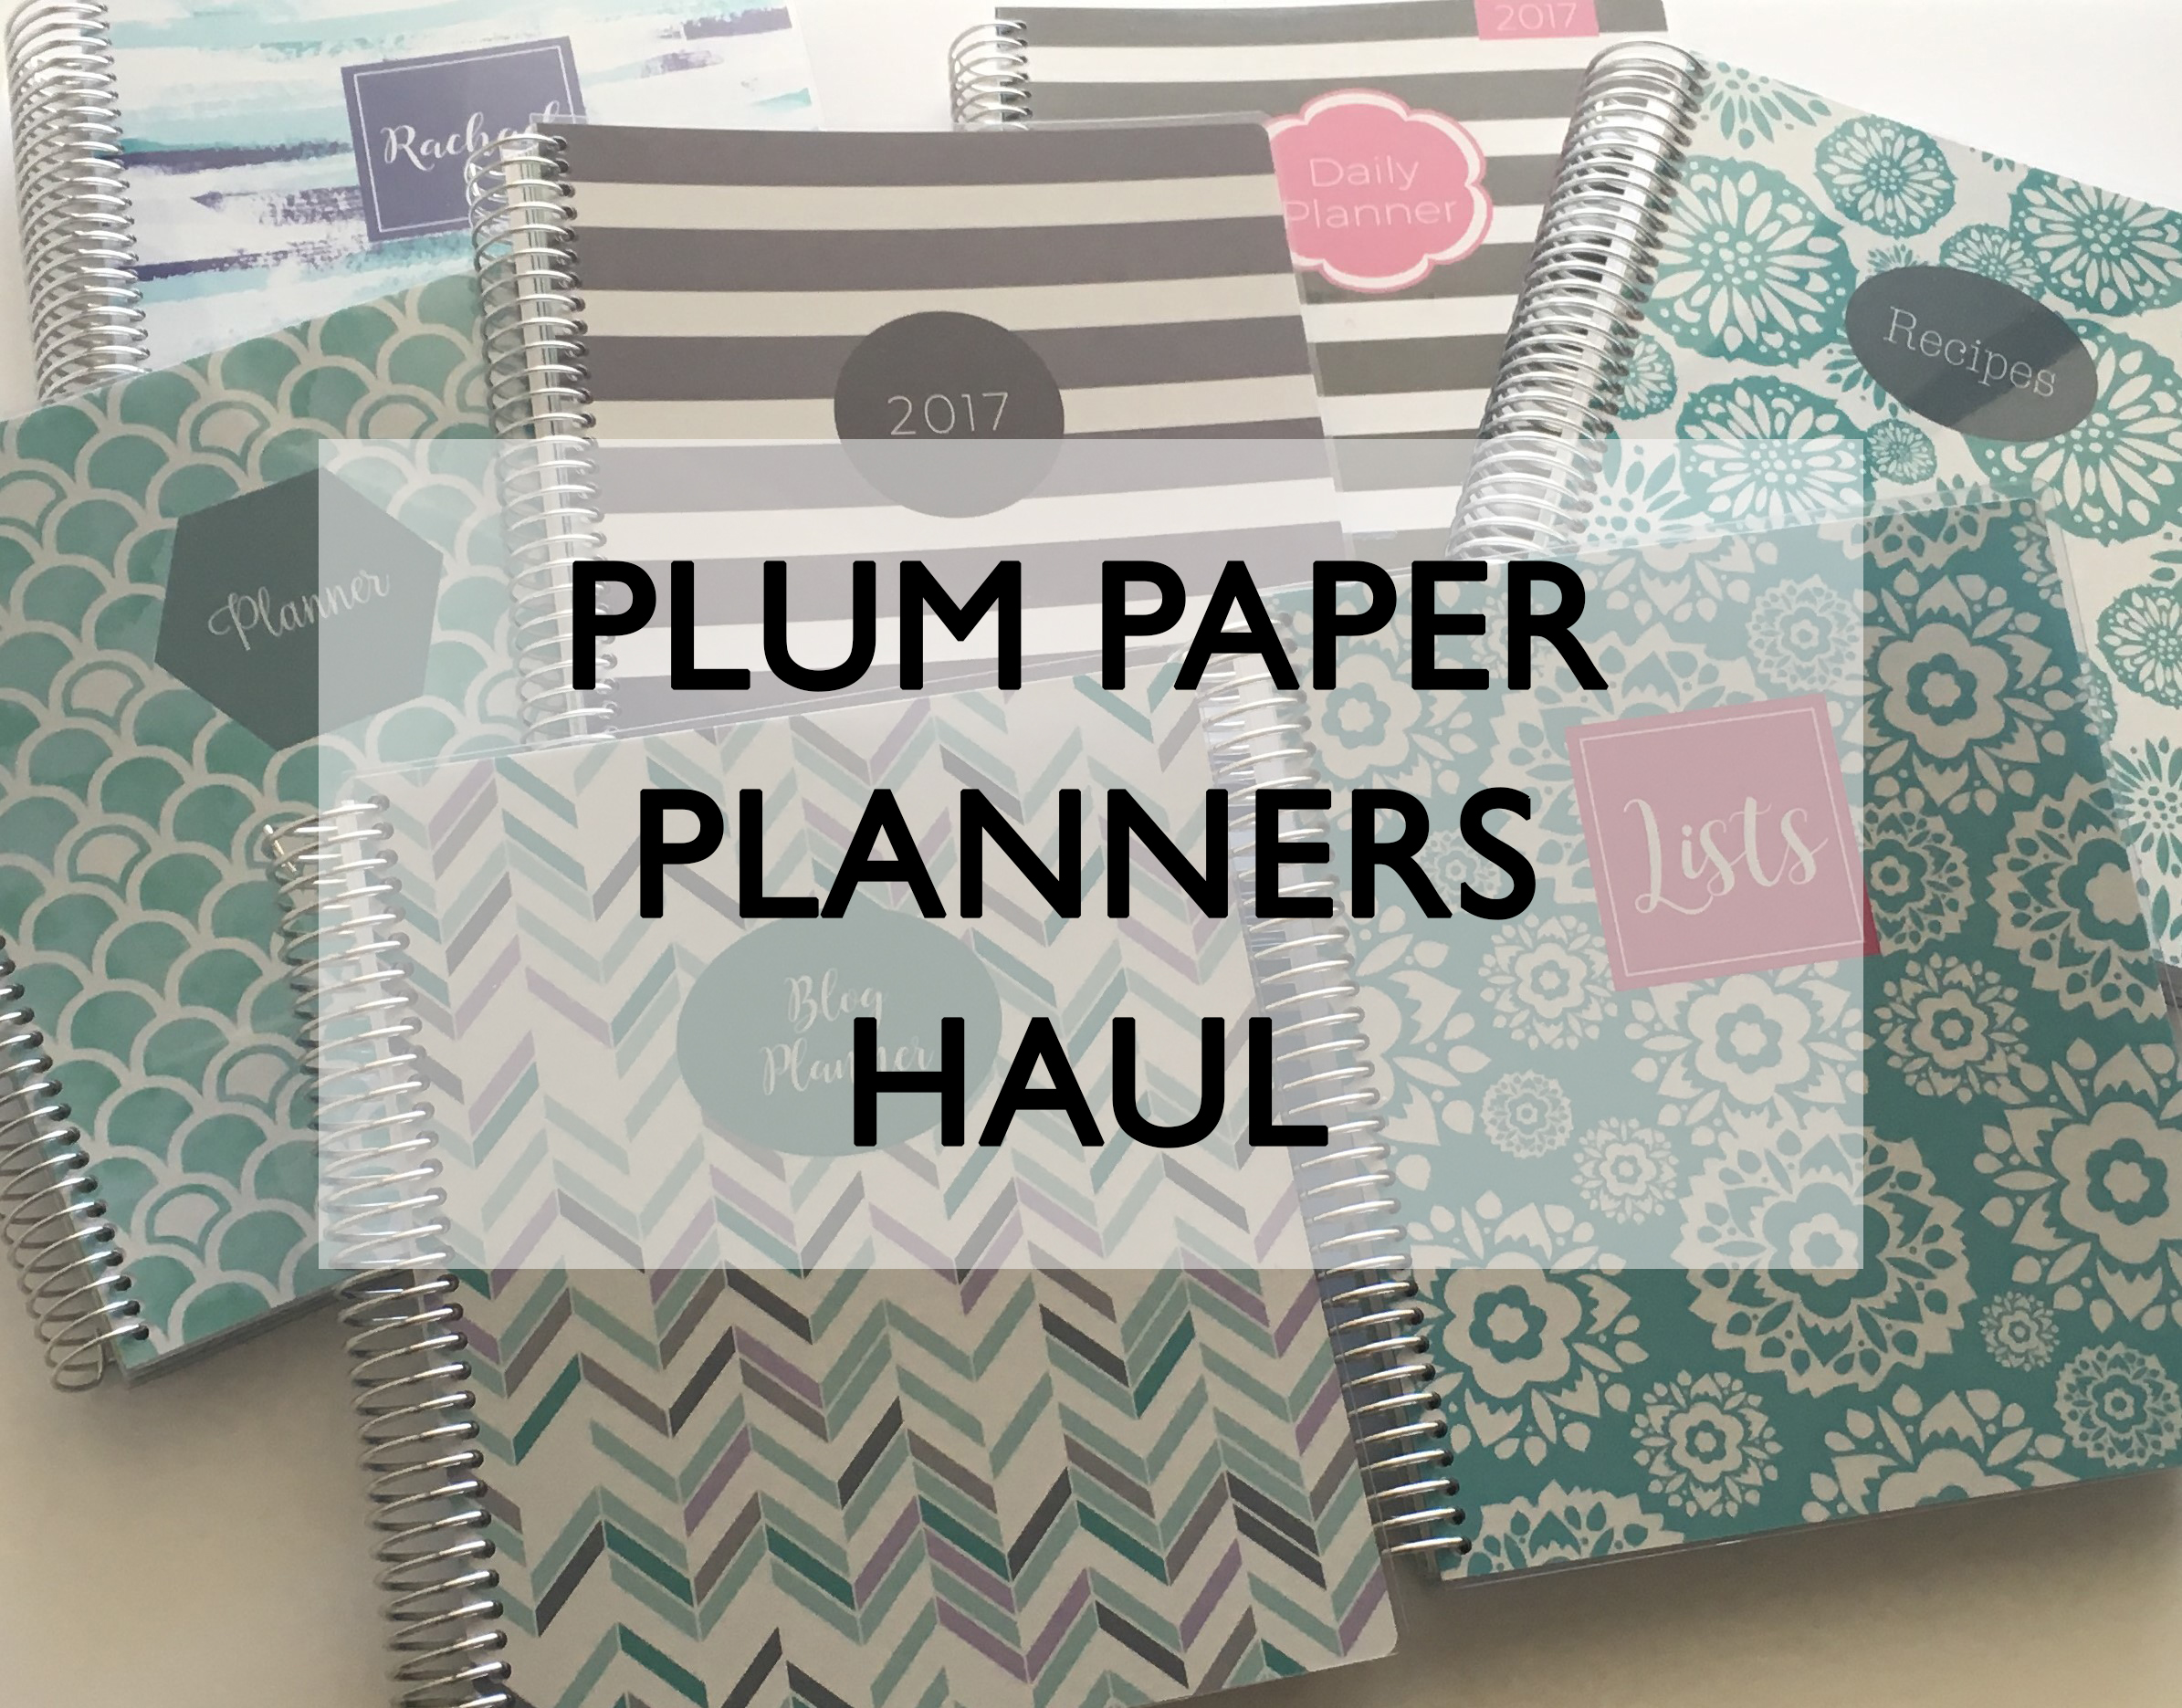 Plum Paper Planner Haul 2017 planner review weekly planner student planner daily custom personalised day planner list notebook blog journal